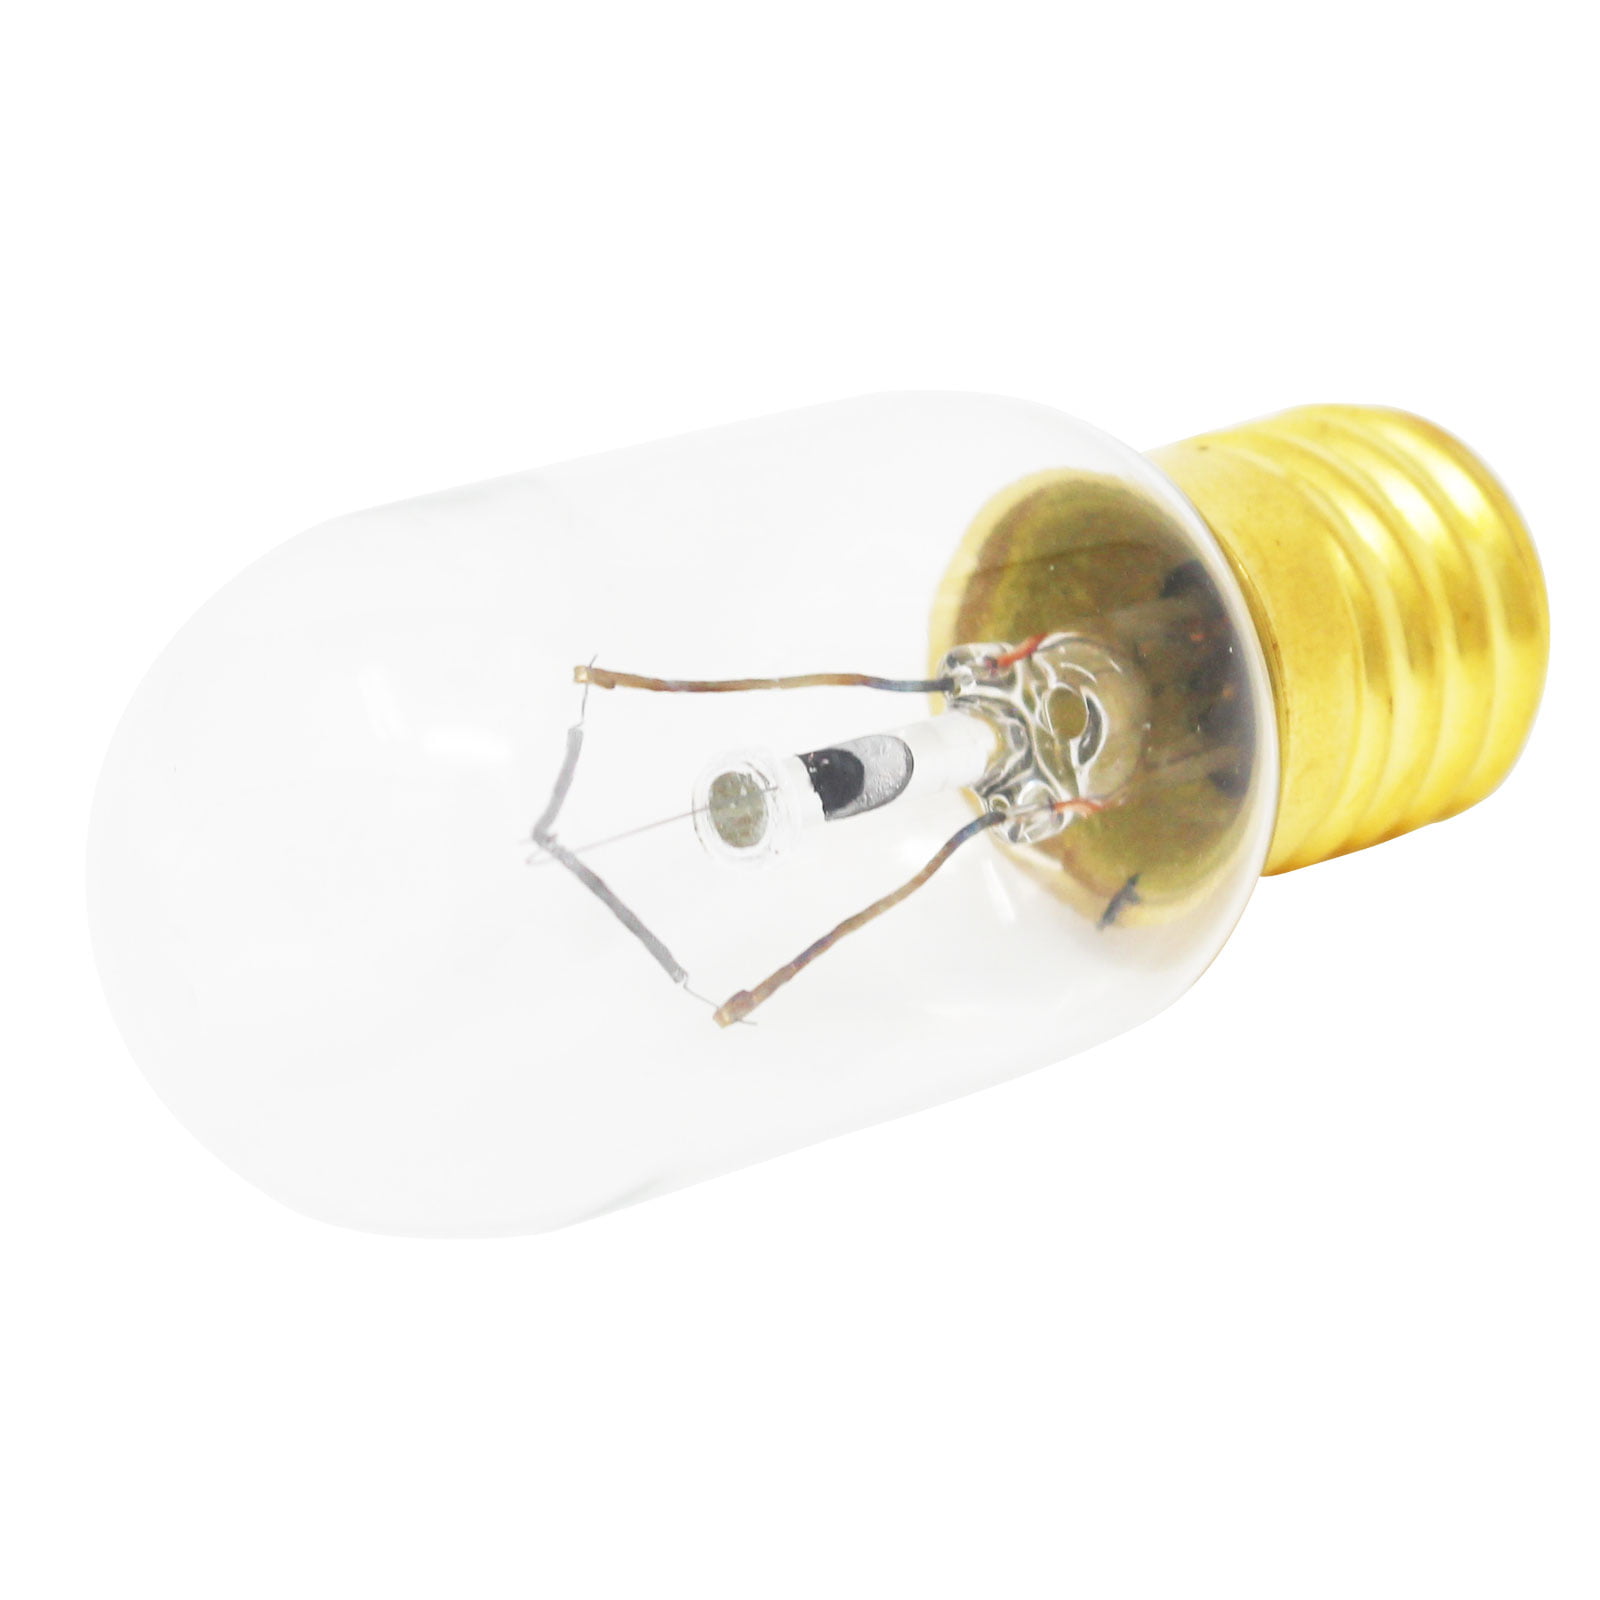 Replacement Light Bulb for General Electric PSC23NHMBWW